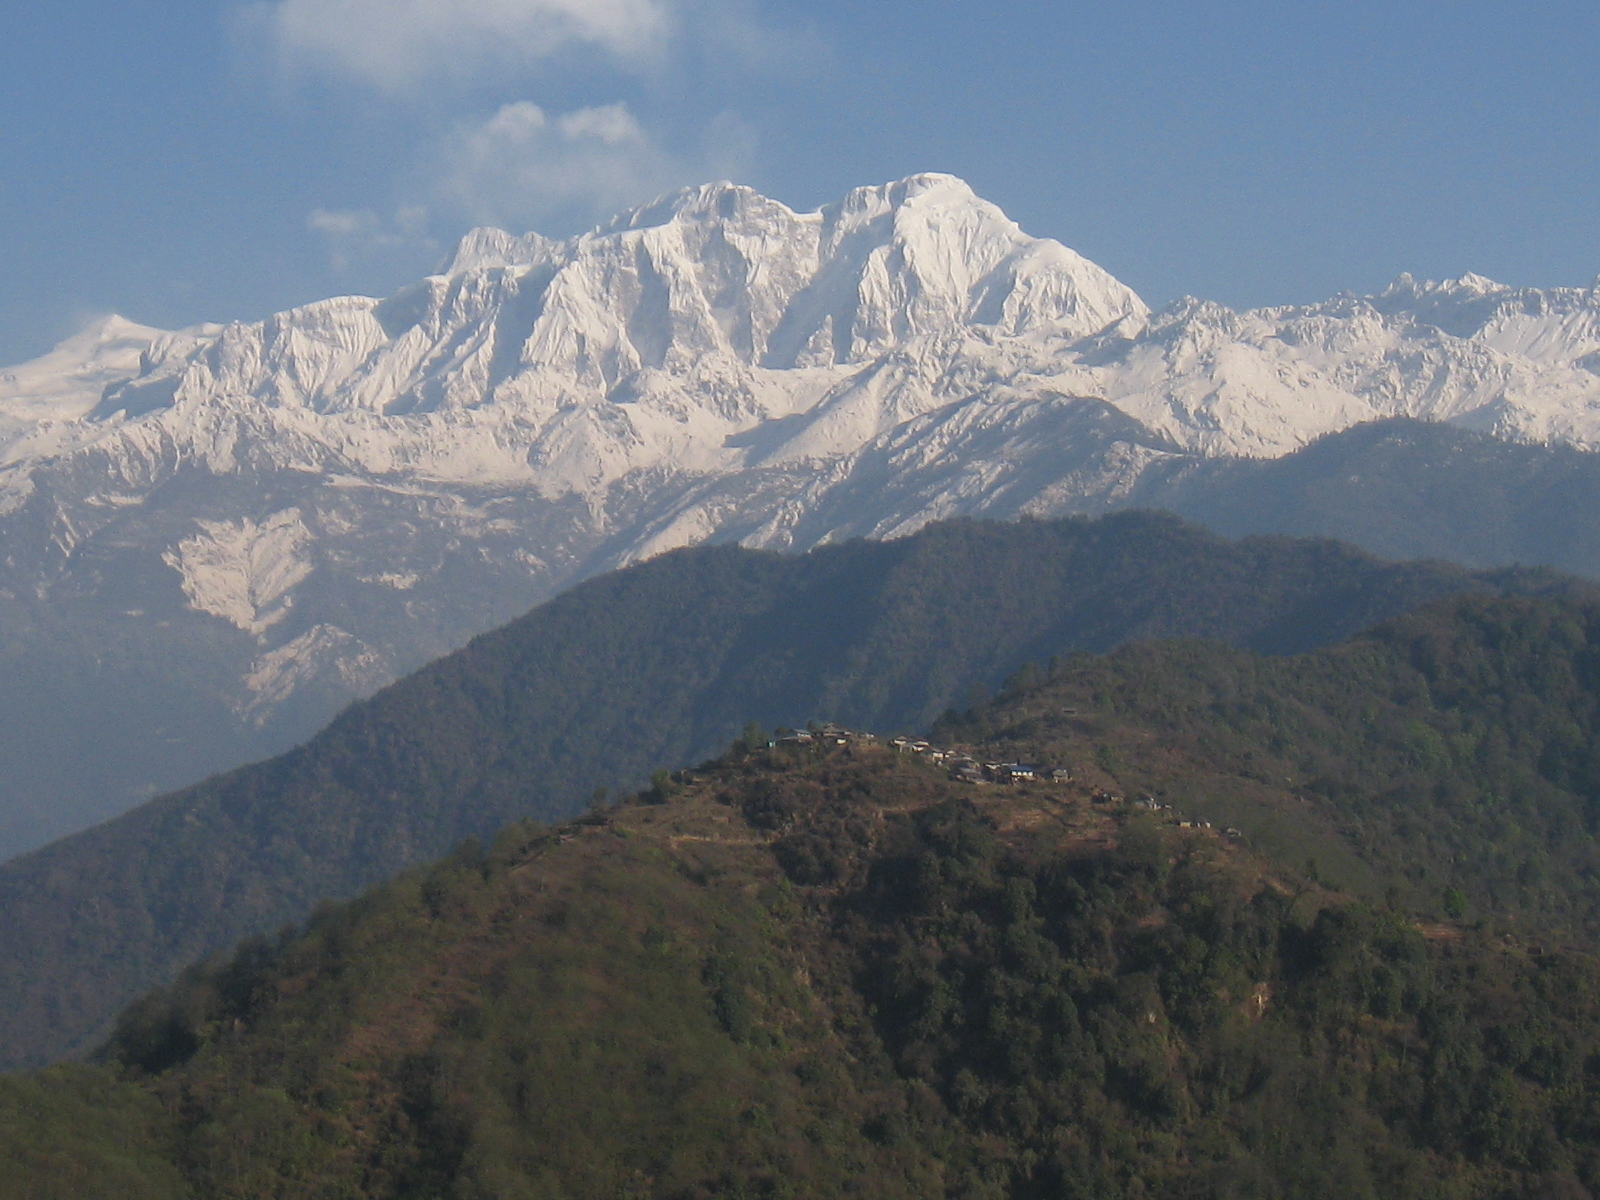 Hike to Ghanpokhara village 2157m (1 hrs).overnight at home-stay.'